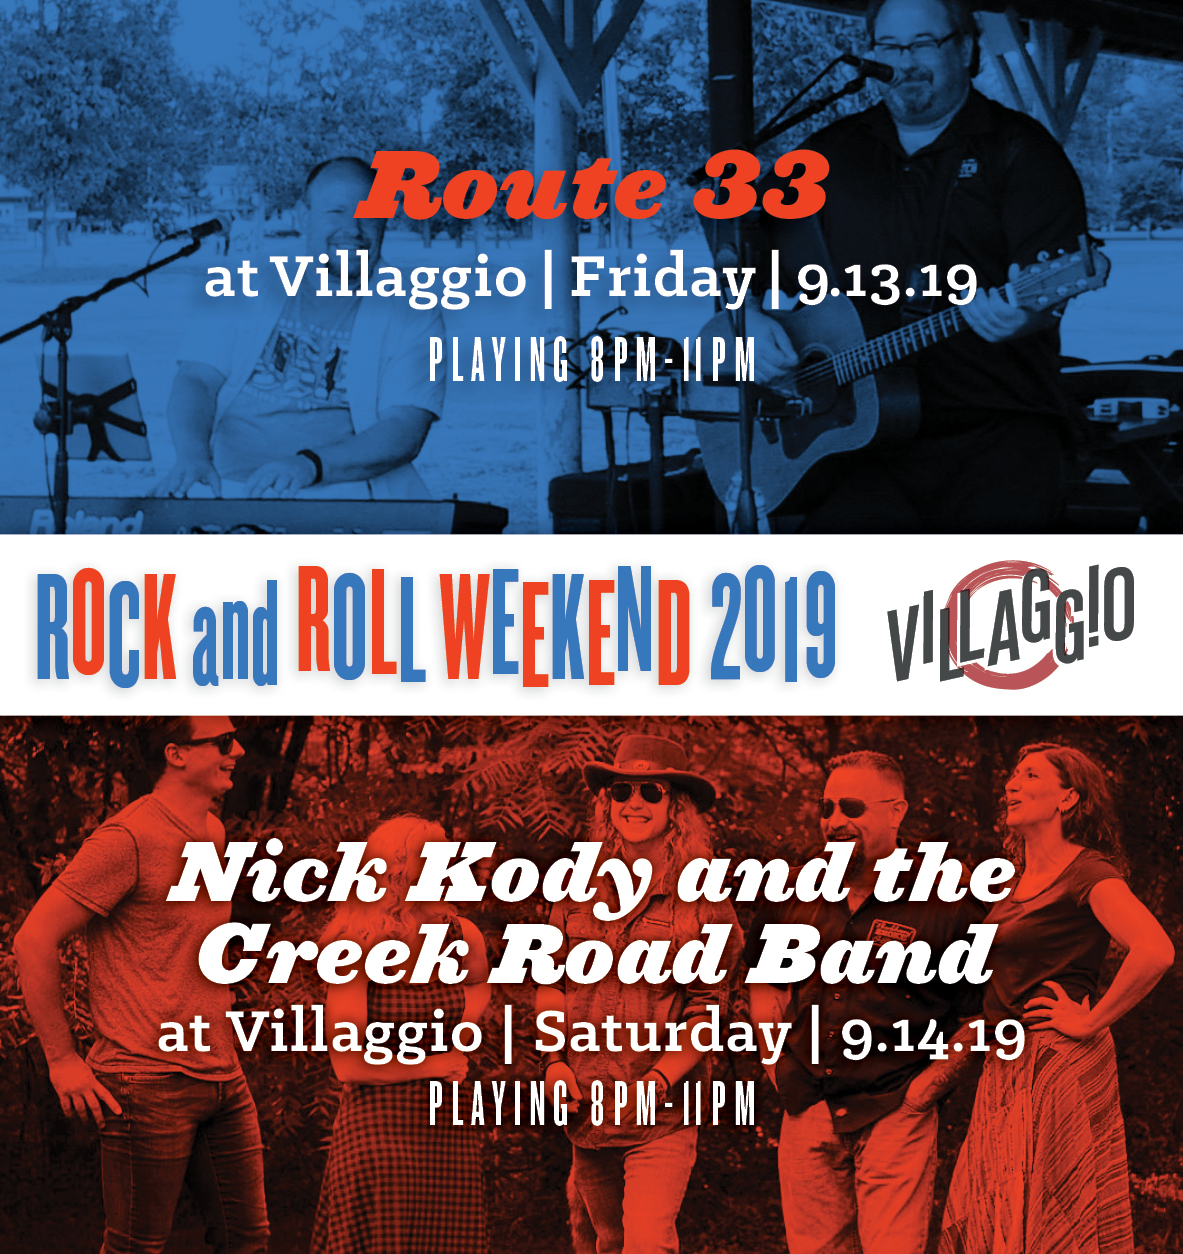 Rock and Roll Weekend - Nick Cody and the Creek Road Band